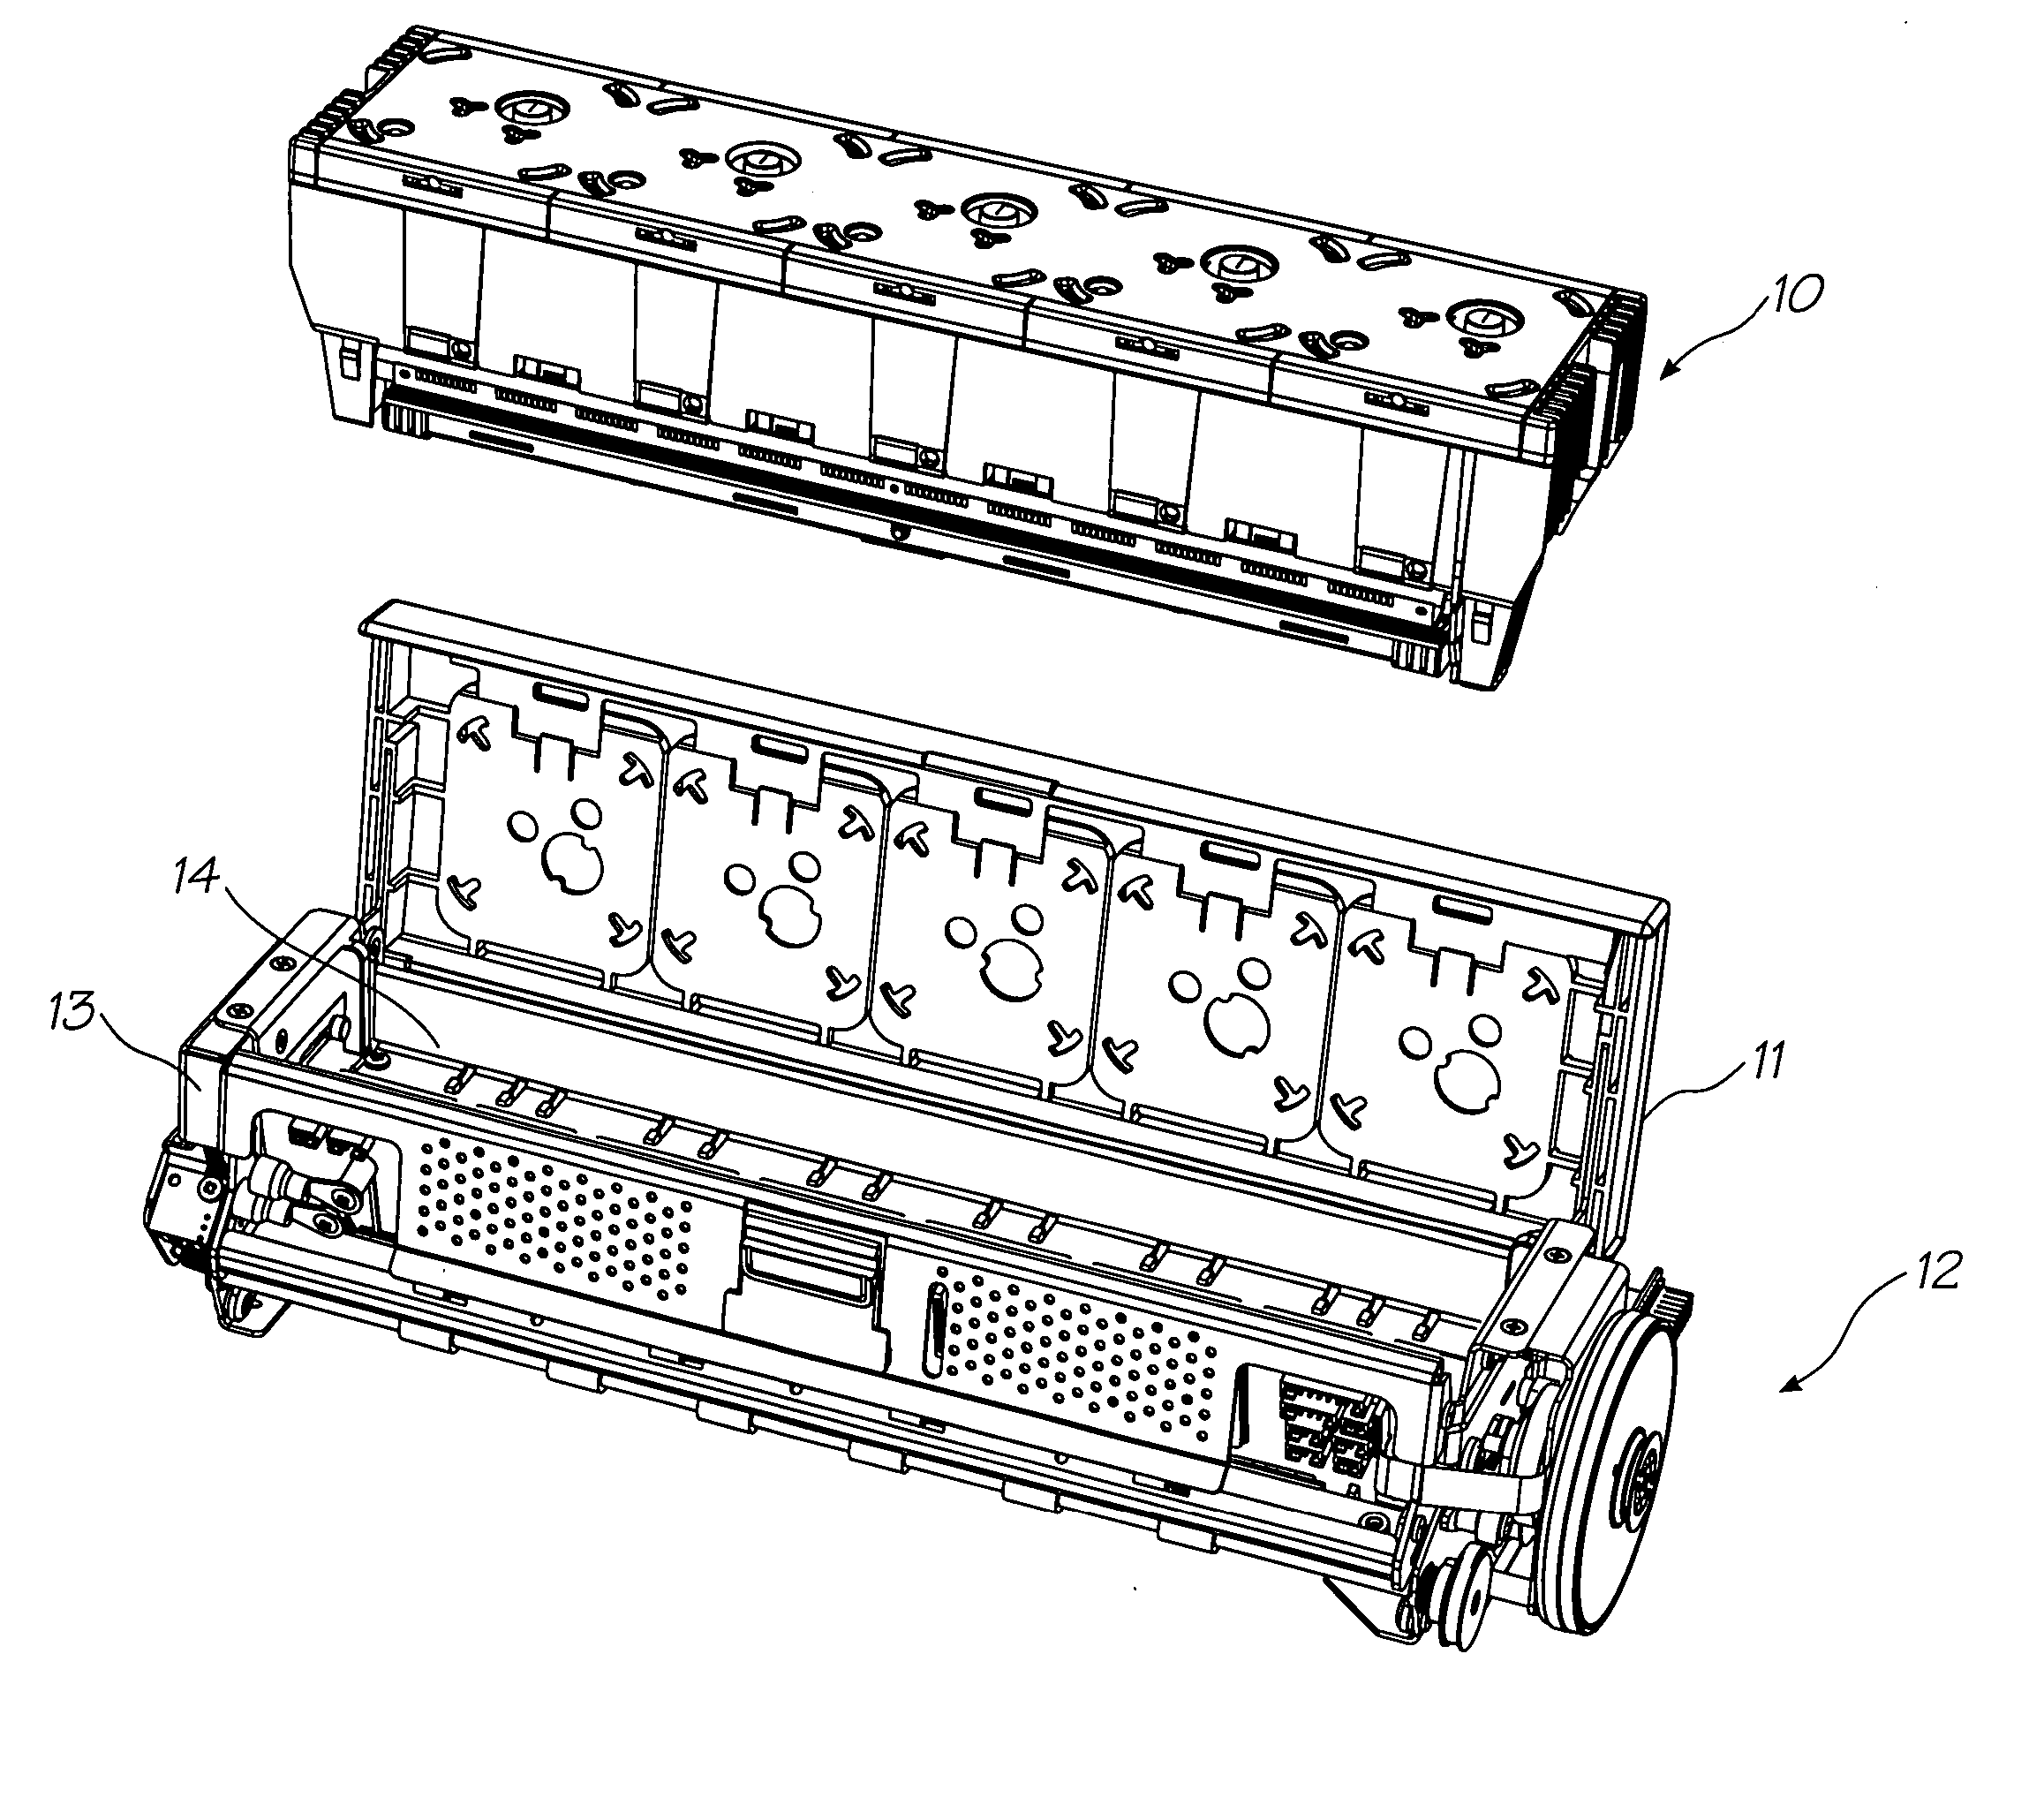 Refill unit for simultaneously engaging with, and opening inlet valve to, an ink cartridge